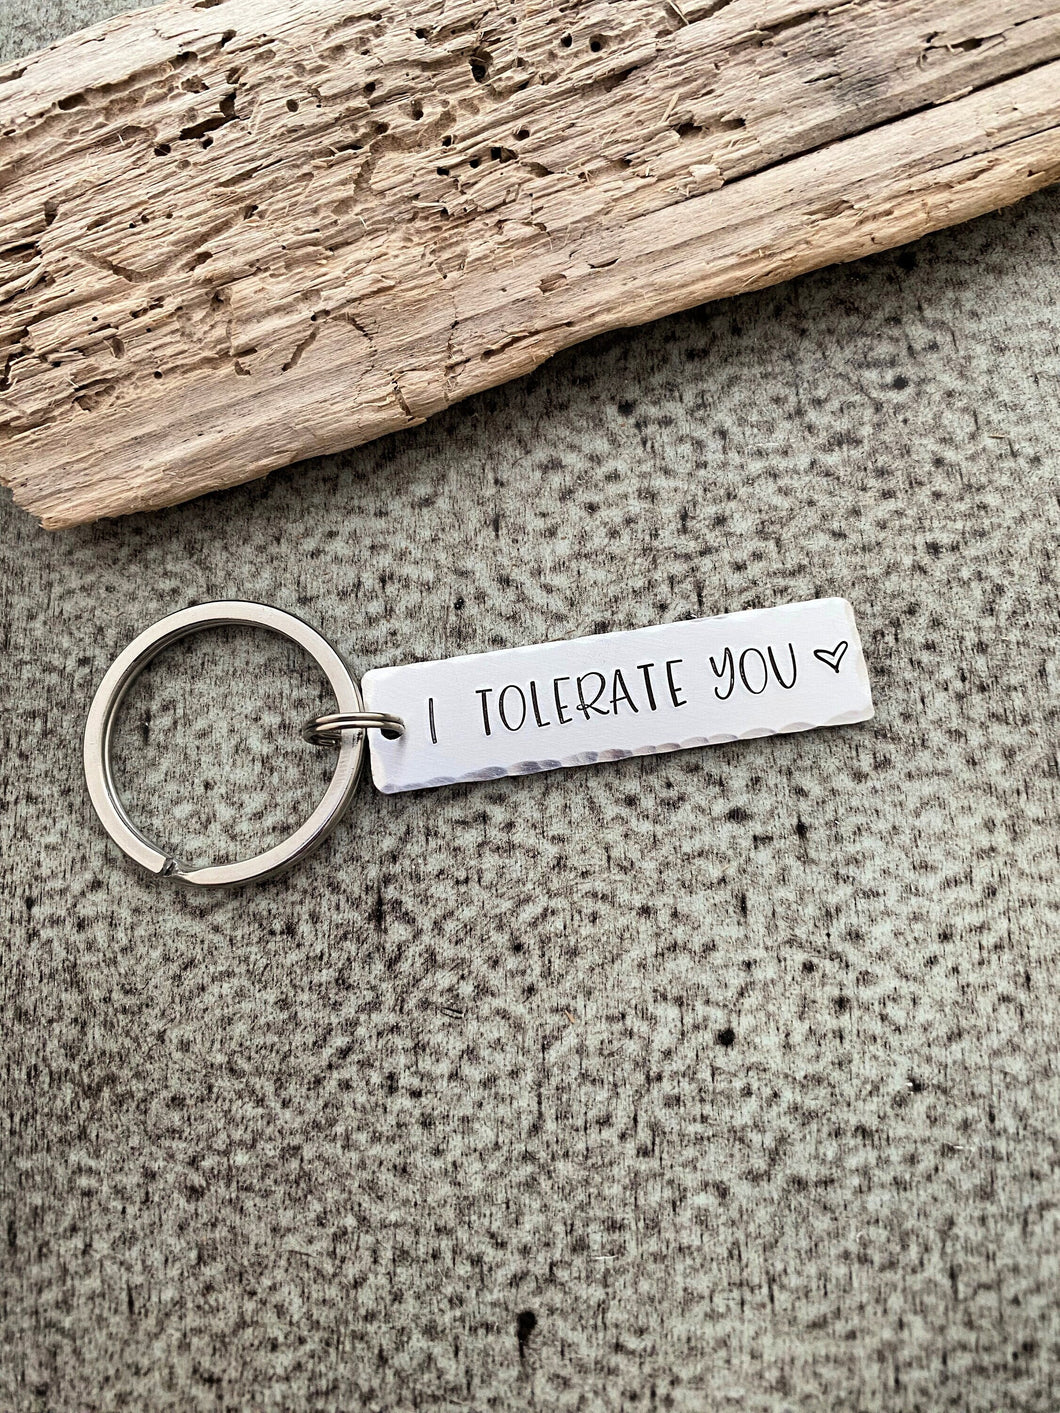 Beach Cove Jewelry I Tolerate You Keychain - Aluminum Silver Keychain - Valentine's Day Gift Idea for Him - Funny Key Chain - Gift for Boyfriend - Rectangle